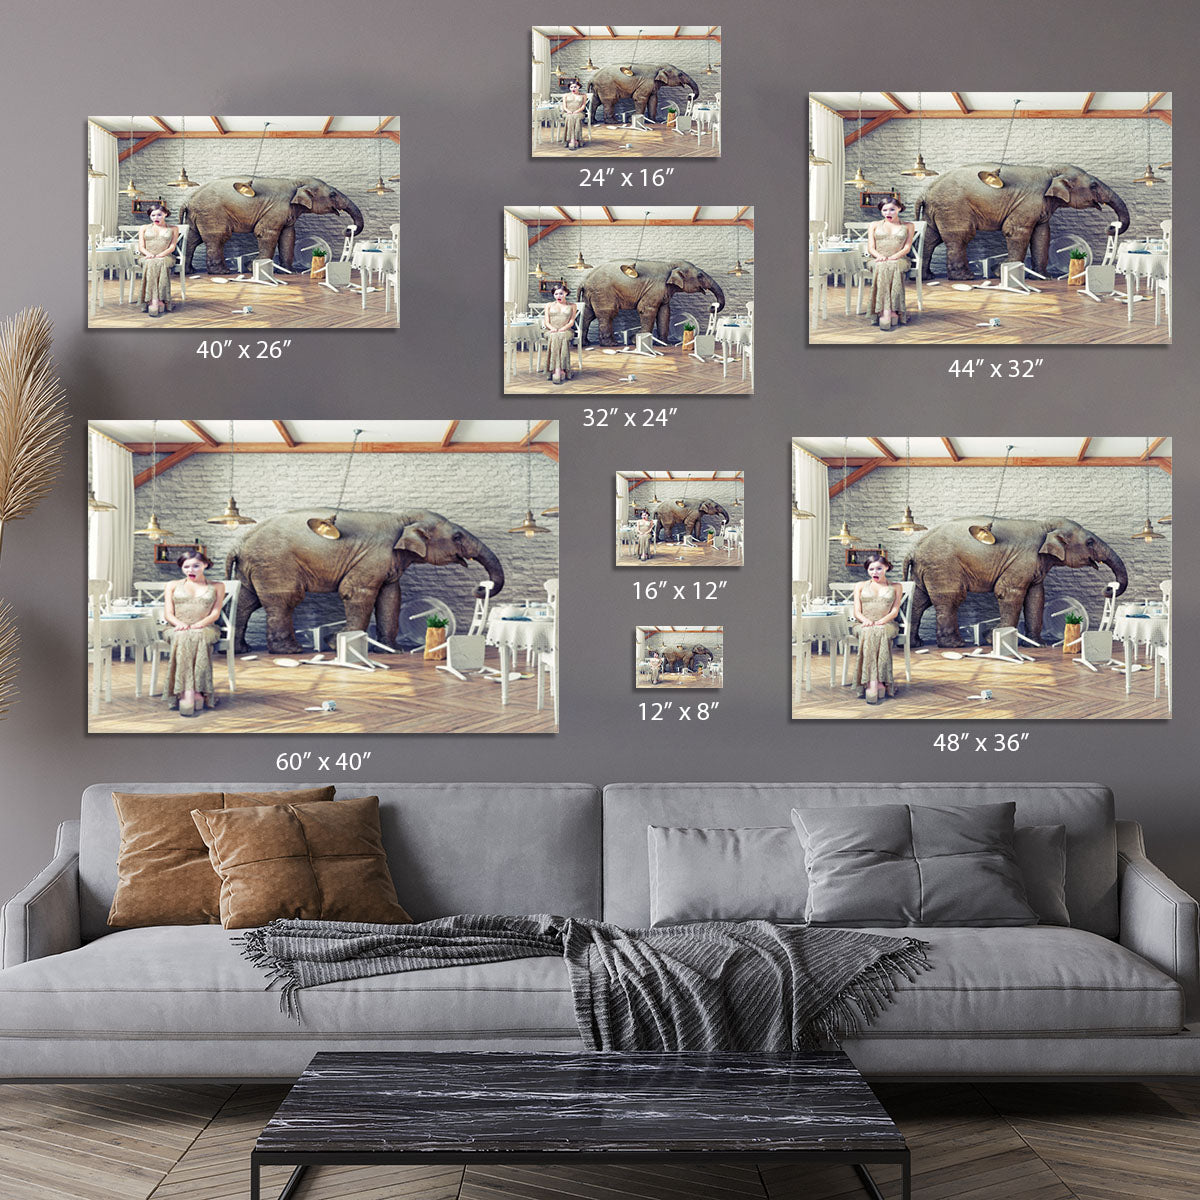 The elephant calm in a restaurant interior. photo combination concept Canvas Print or Poster - Canvas Art Rocks - 7